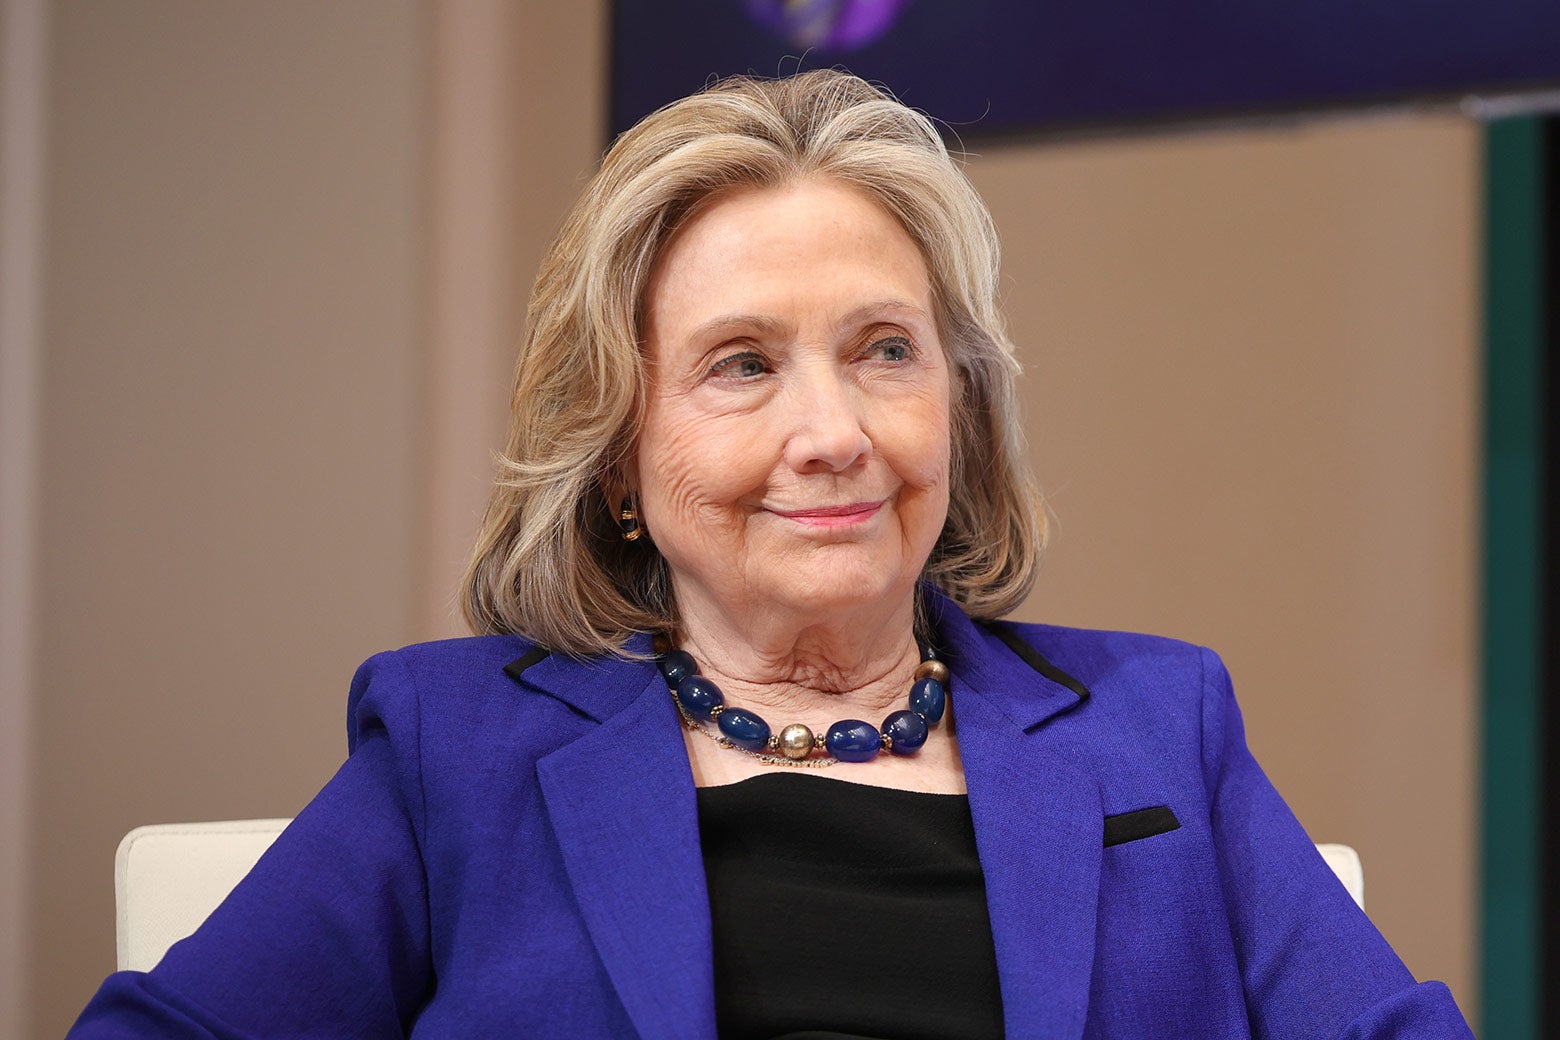 No Offense, but Hillary Clinton’s Advice Is Really Not Needed Here